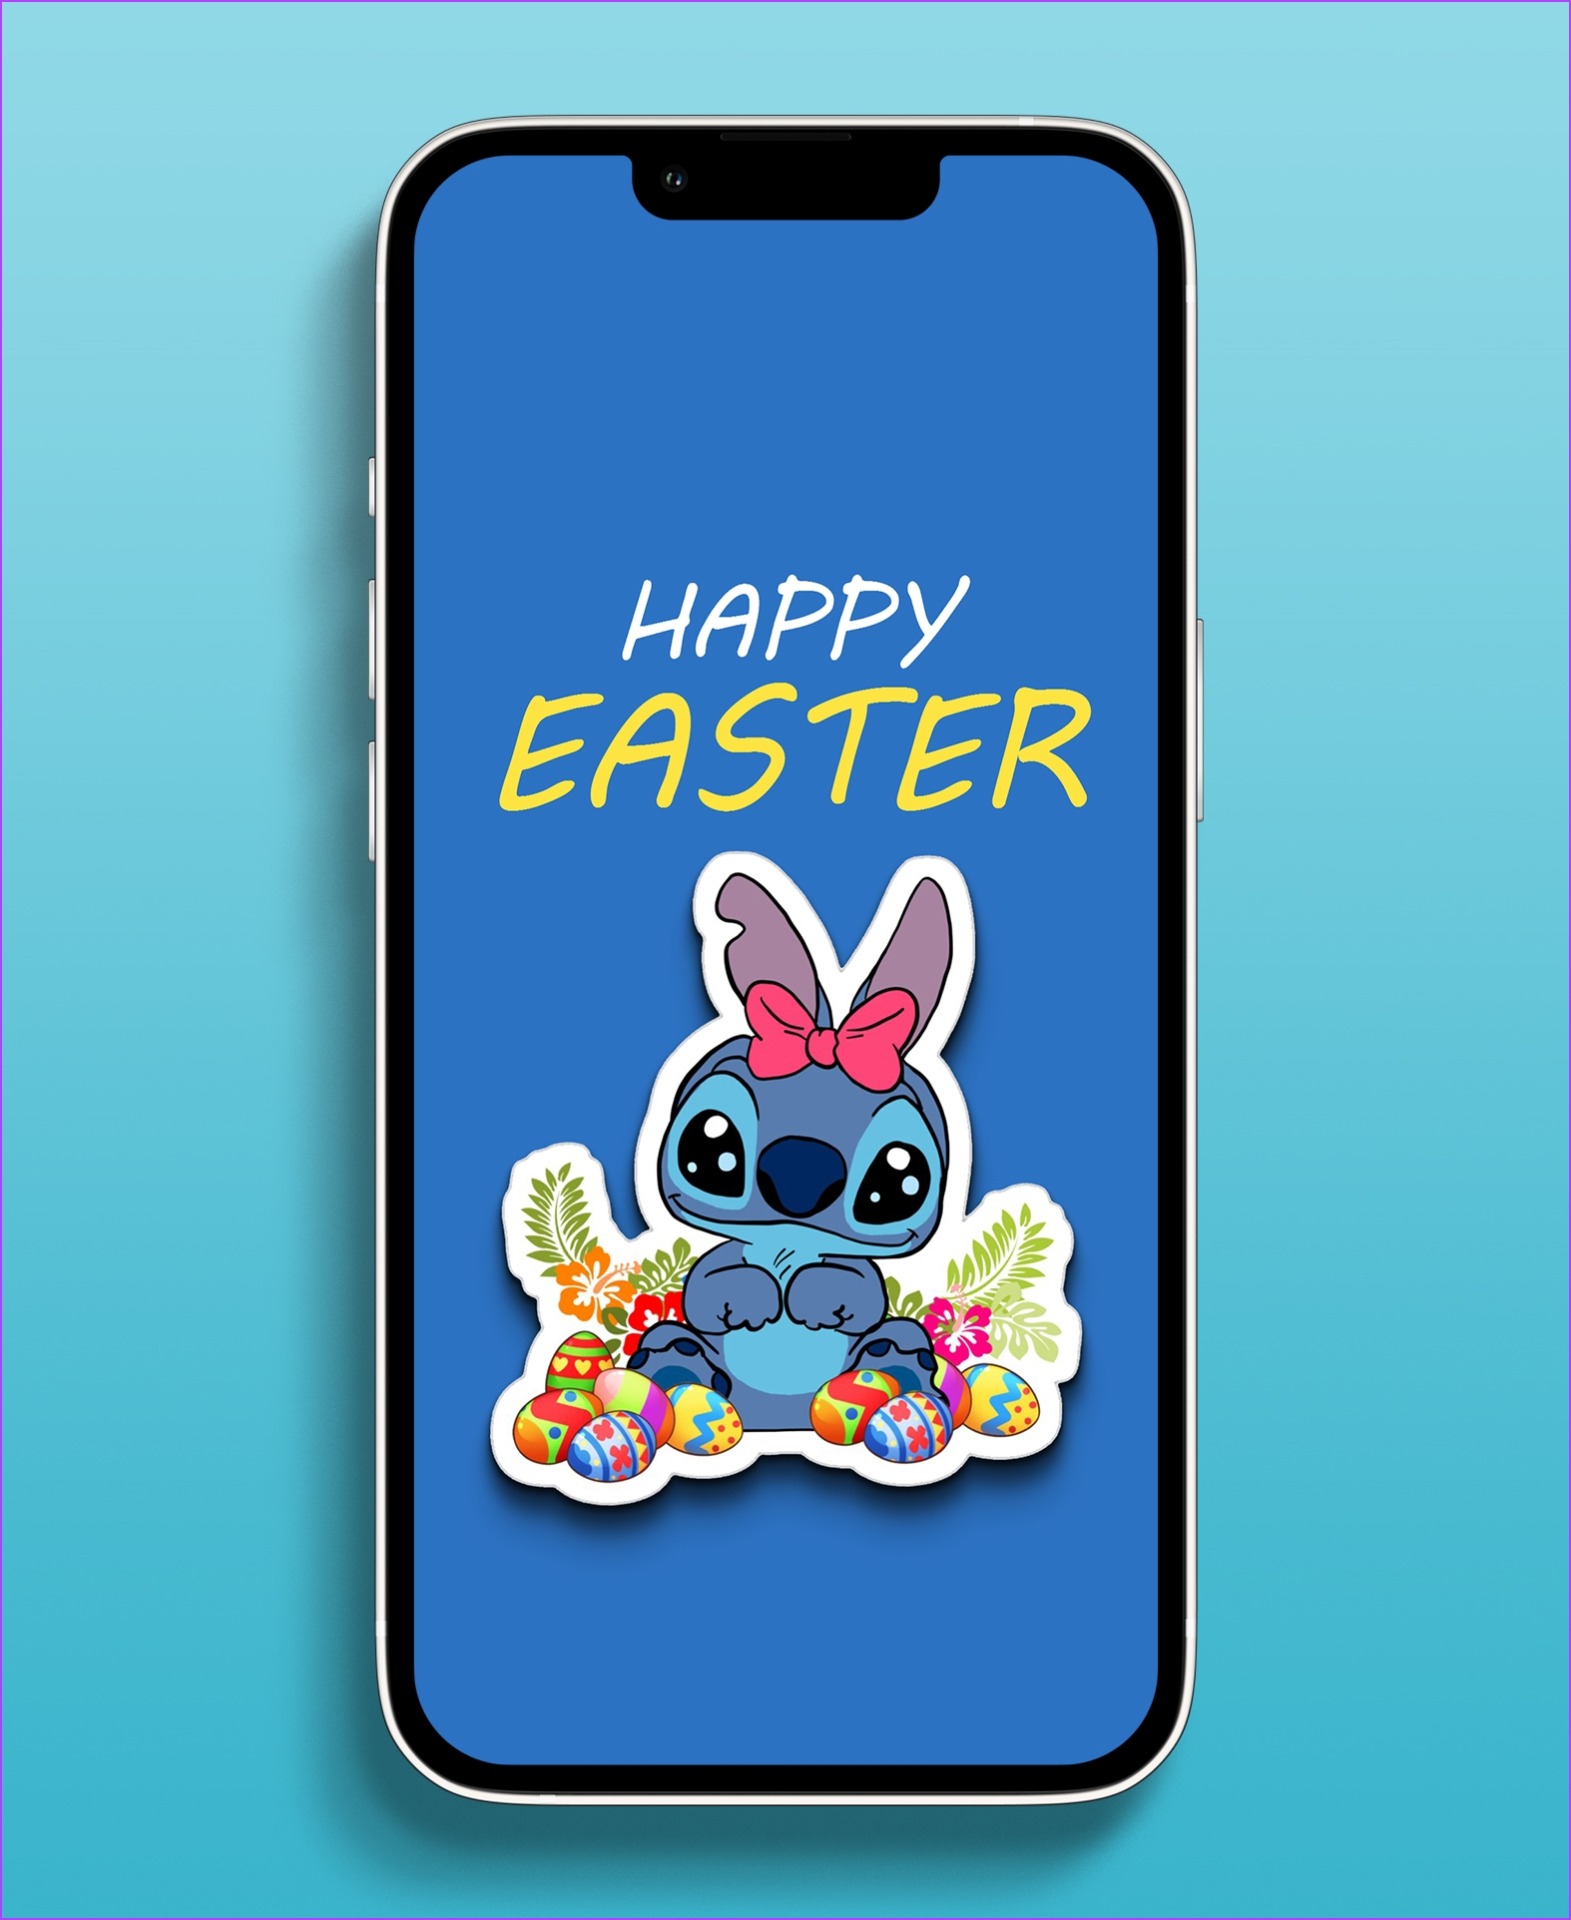 Cute Easter Eggs In A Wicker Nest Greeting Card On A Blue Background  Wallpaper Flyers Web Design Brochurevoucher Vector Illustration  Royalty Free SVG Cliparts Vectors And Stock Illustration Image 74542994